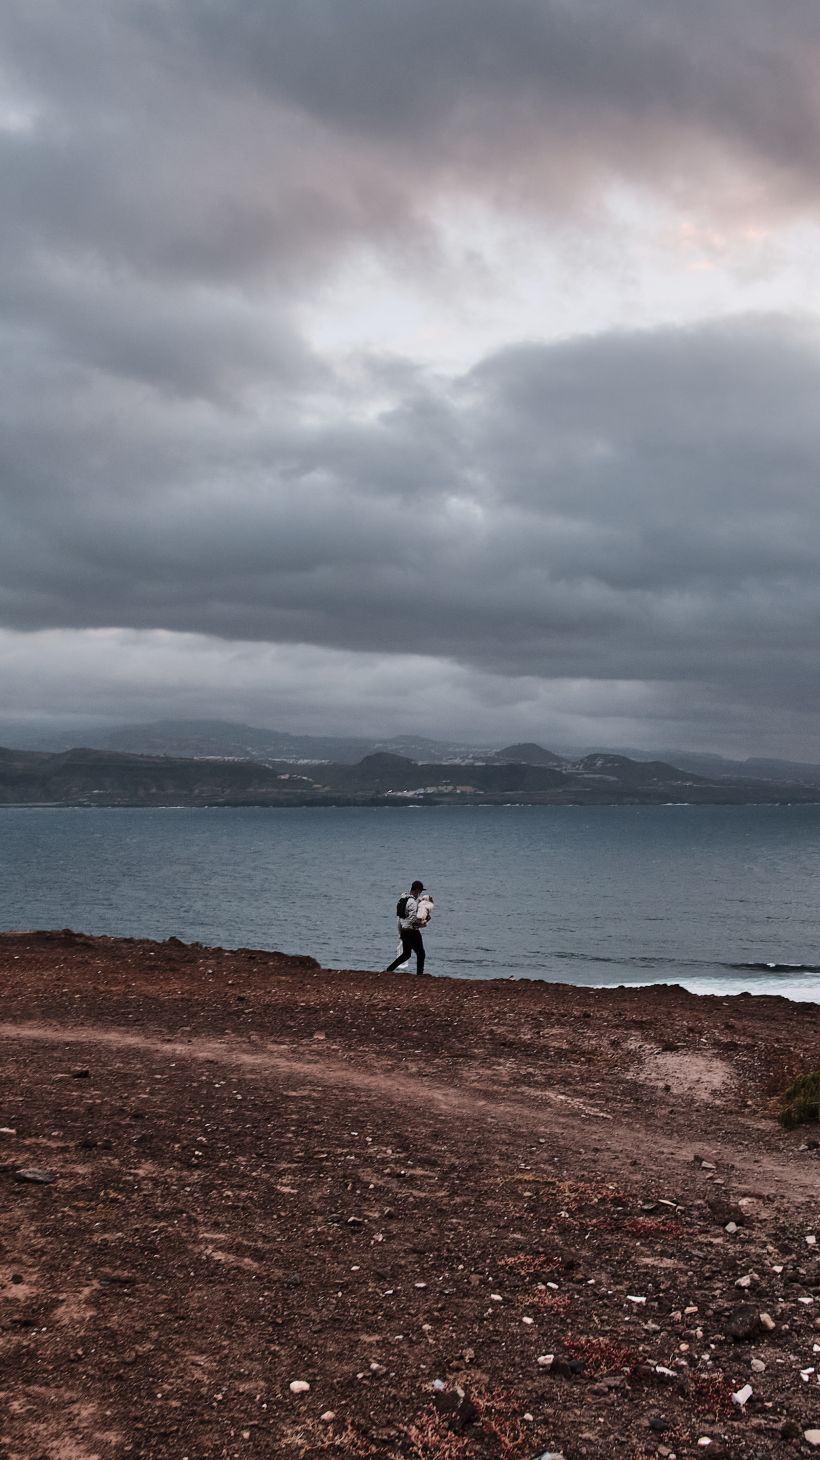 A photo of a man from Morocco carries food supplies to his tent settlement by the sea.